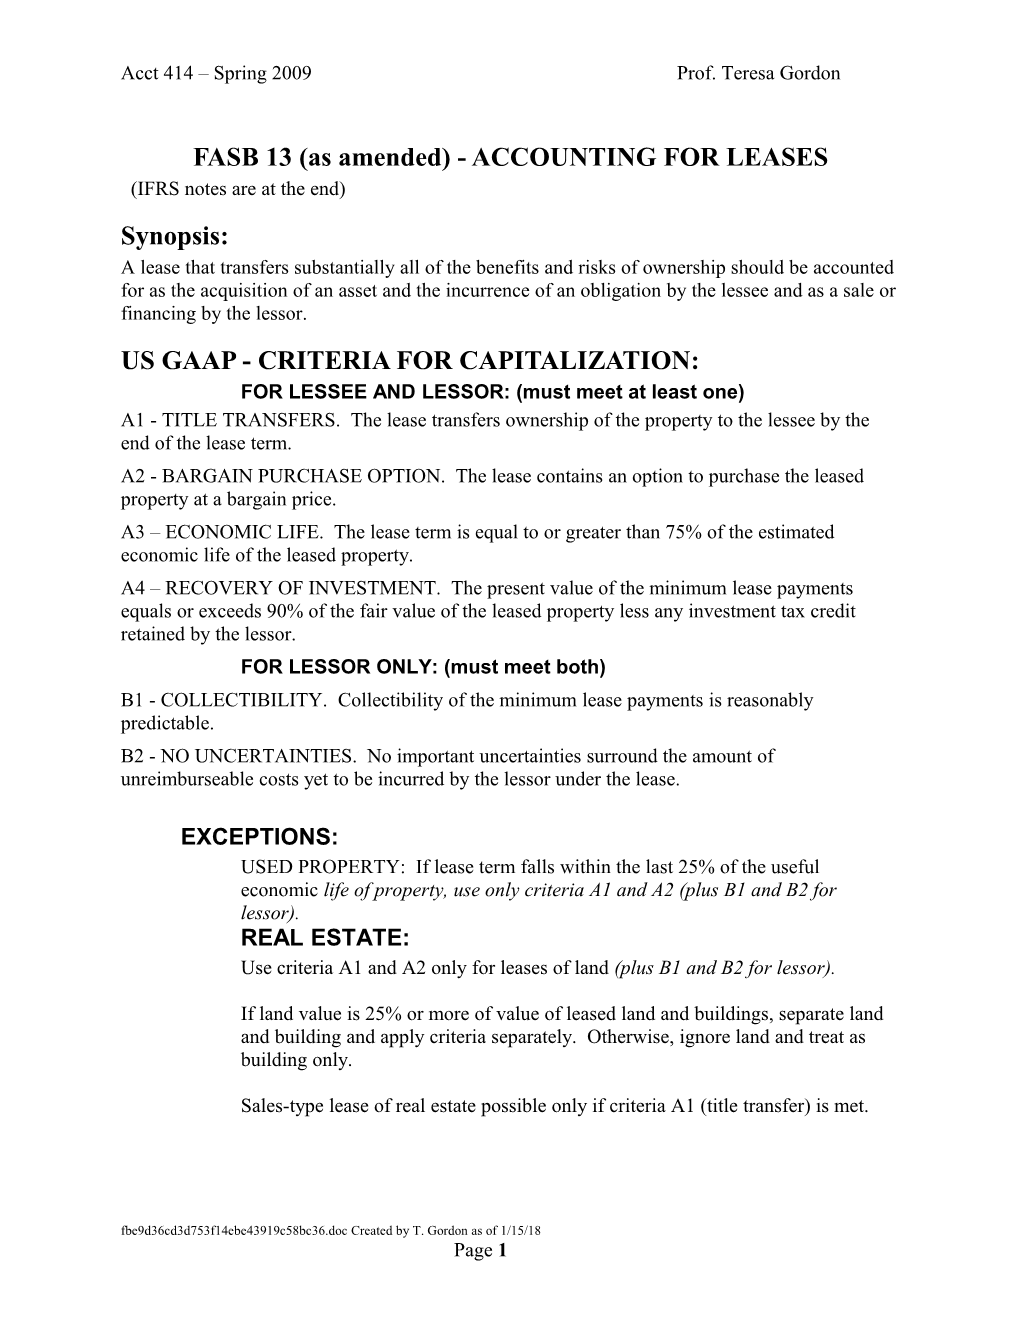 Notes on Lease Accounting Under US GAAP & IFRS (Doc) - About 11 Pages